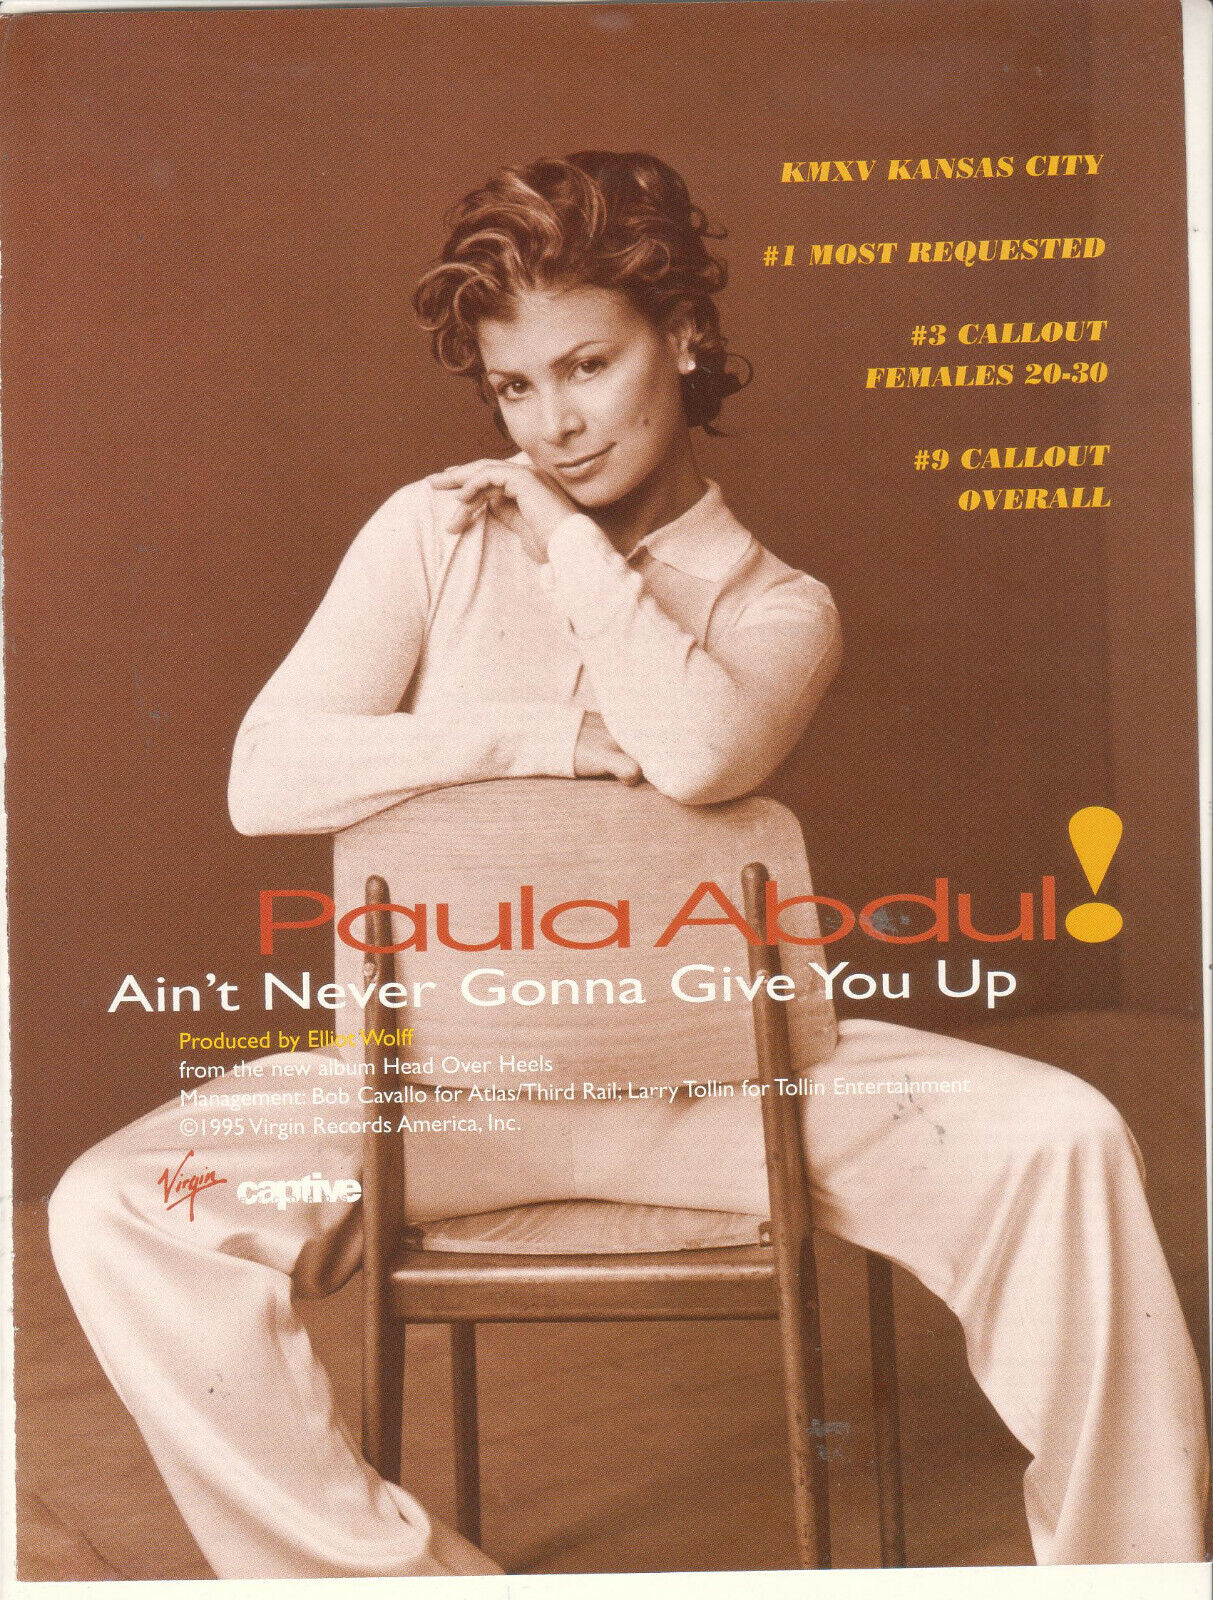 Paula Abdul 1995 Ad-  Ain't Never Gonna Give You Up Advertisement Kmsv